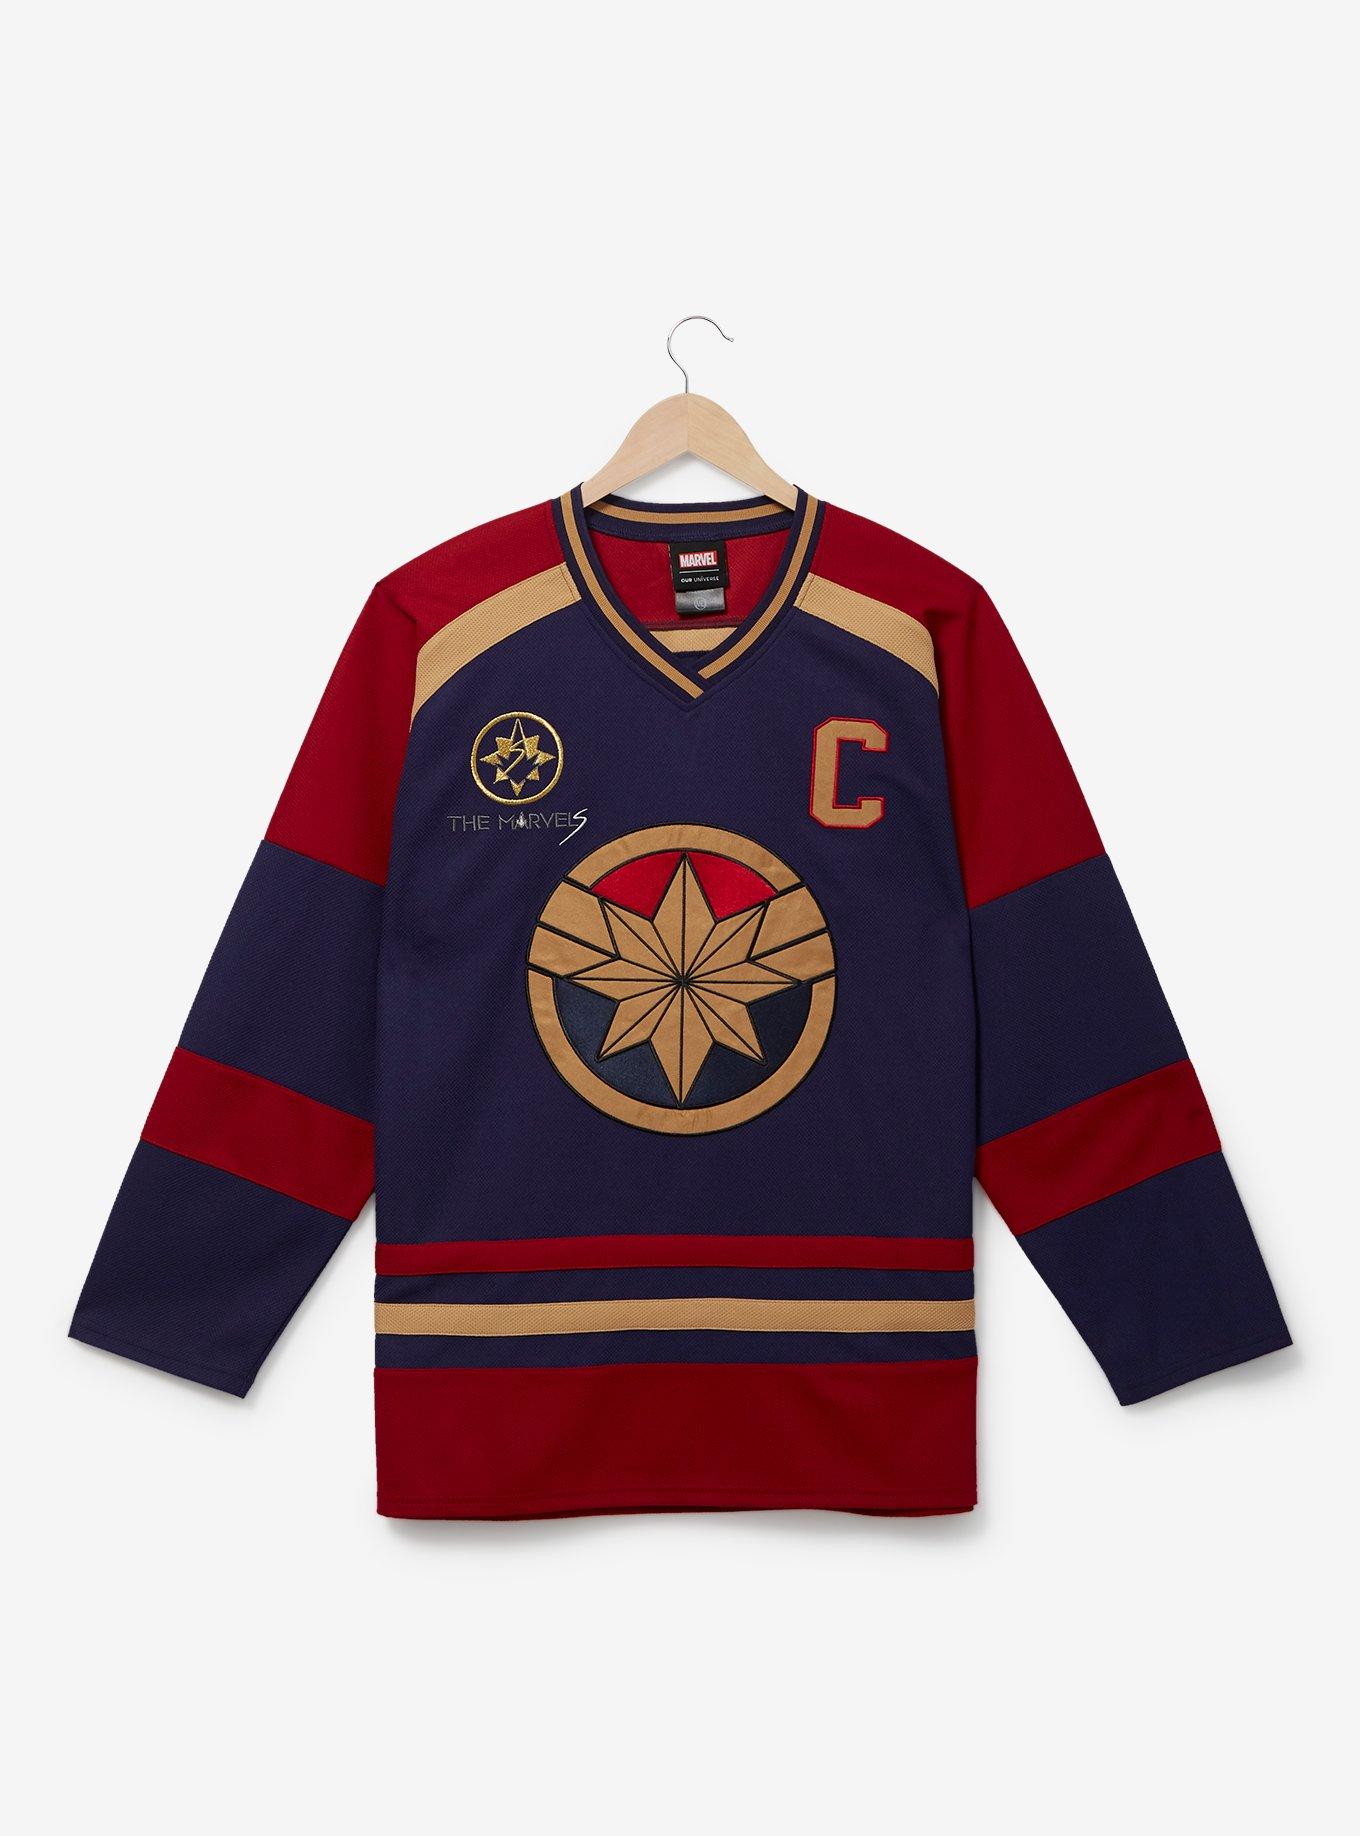 Our Top 6 Vintage NHL Jerseys, by Ross Mohr